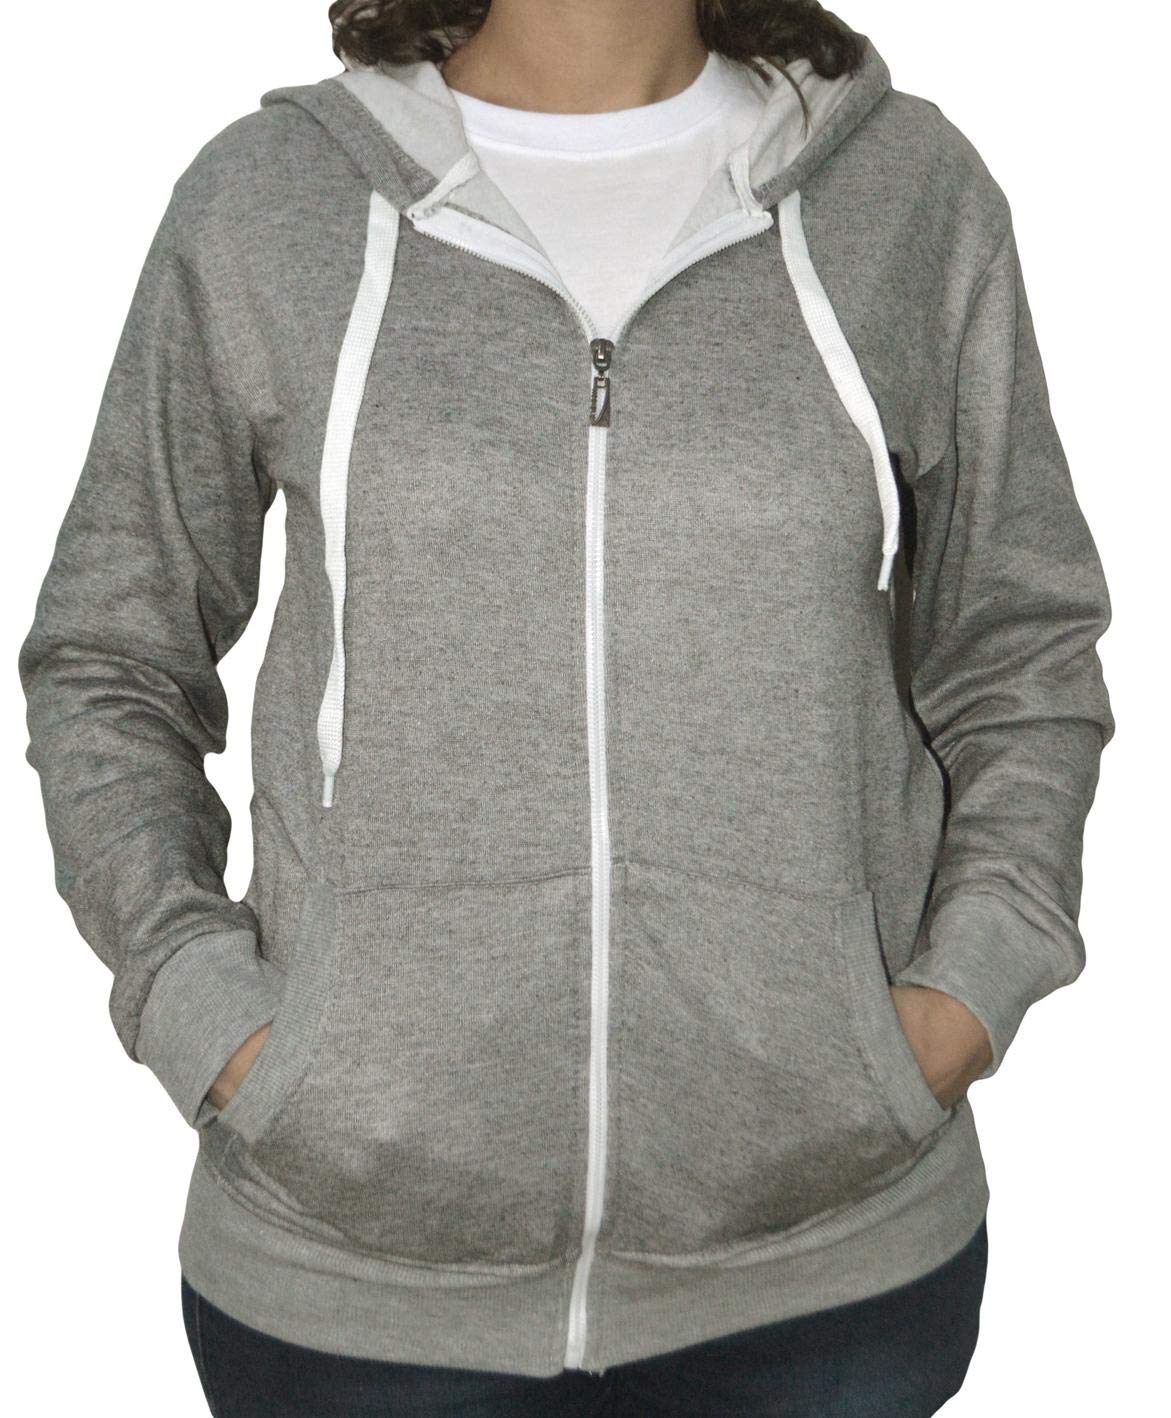 Zip Up Hoodie For Girls Color Grey Size L